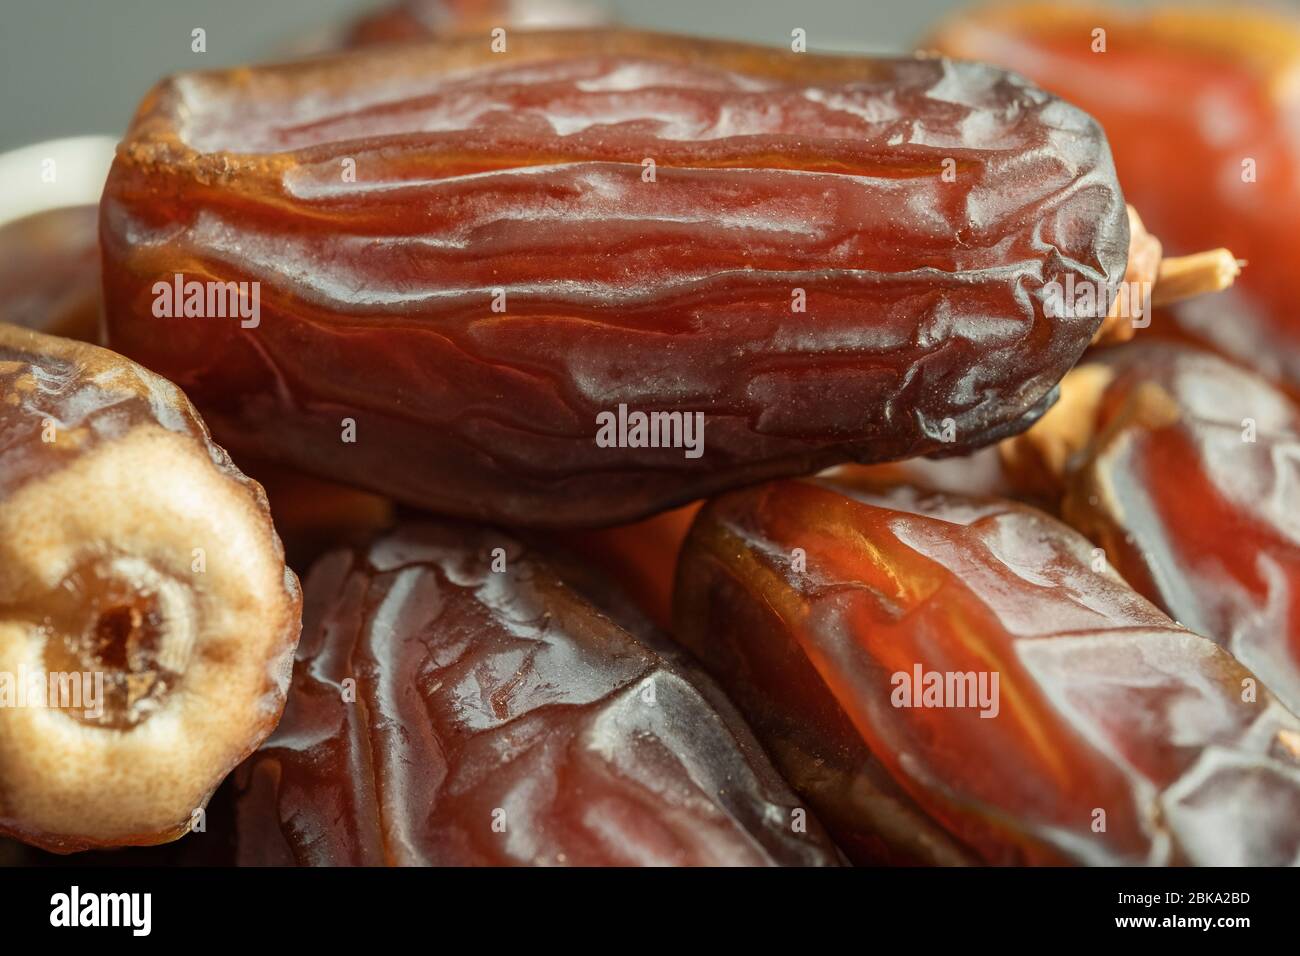 Raw date fruit ready to eat. Traditional, delicious and healthy ramadan food. Detailed view. Stock Photo